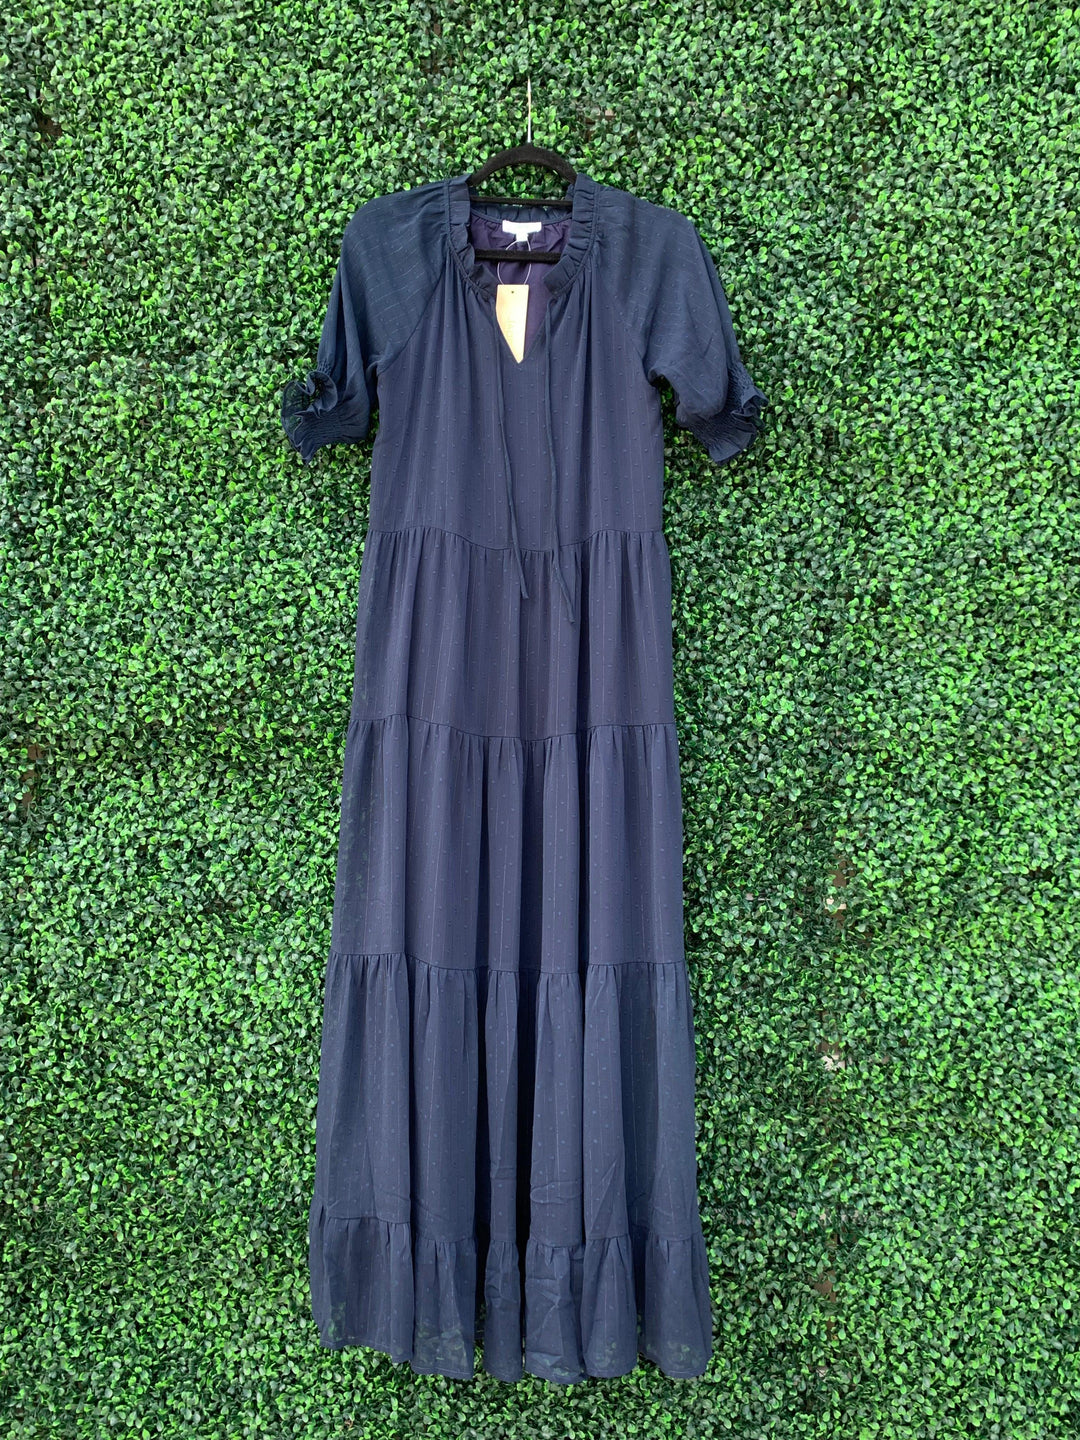 Dark blue long dress with puff sleeve in Houston